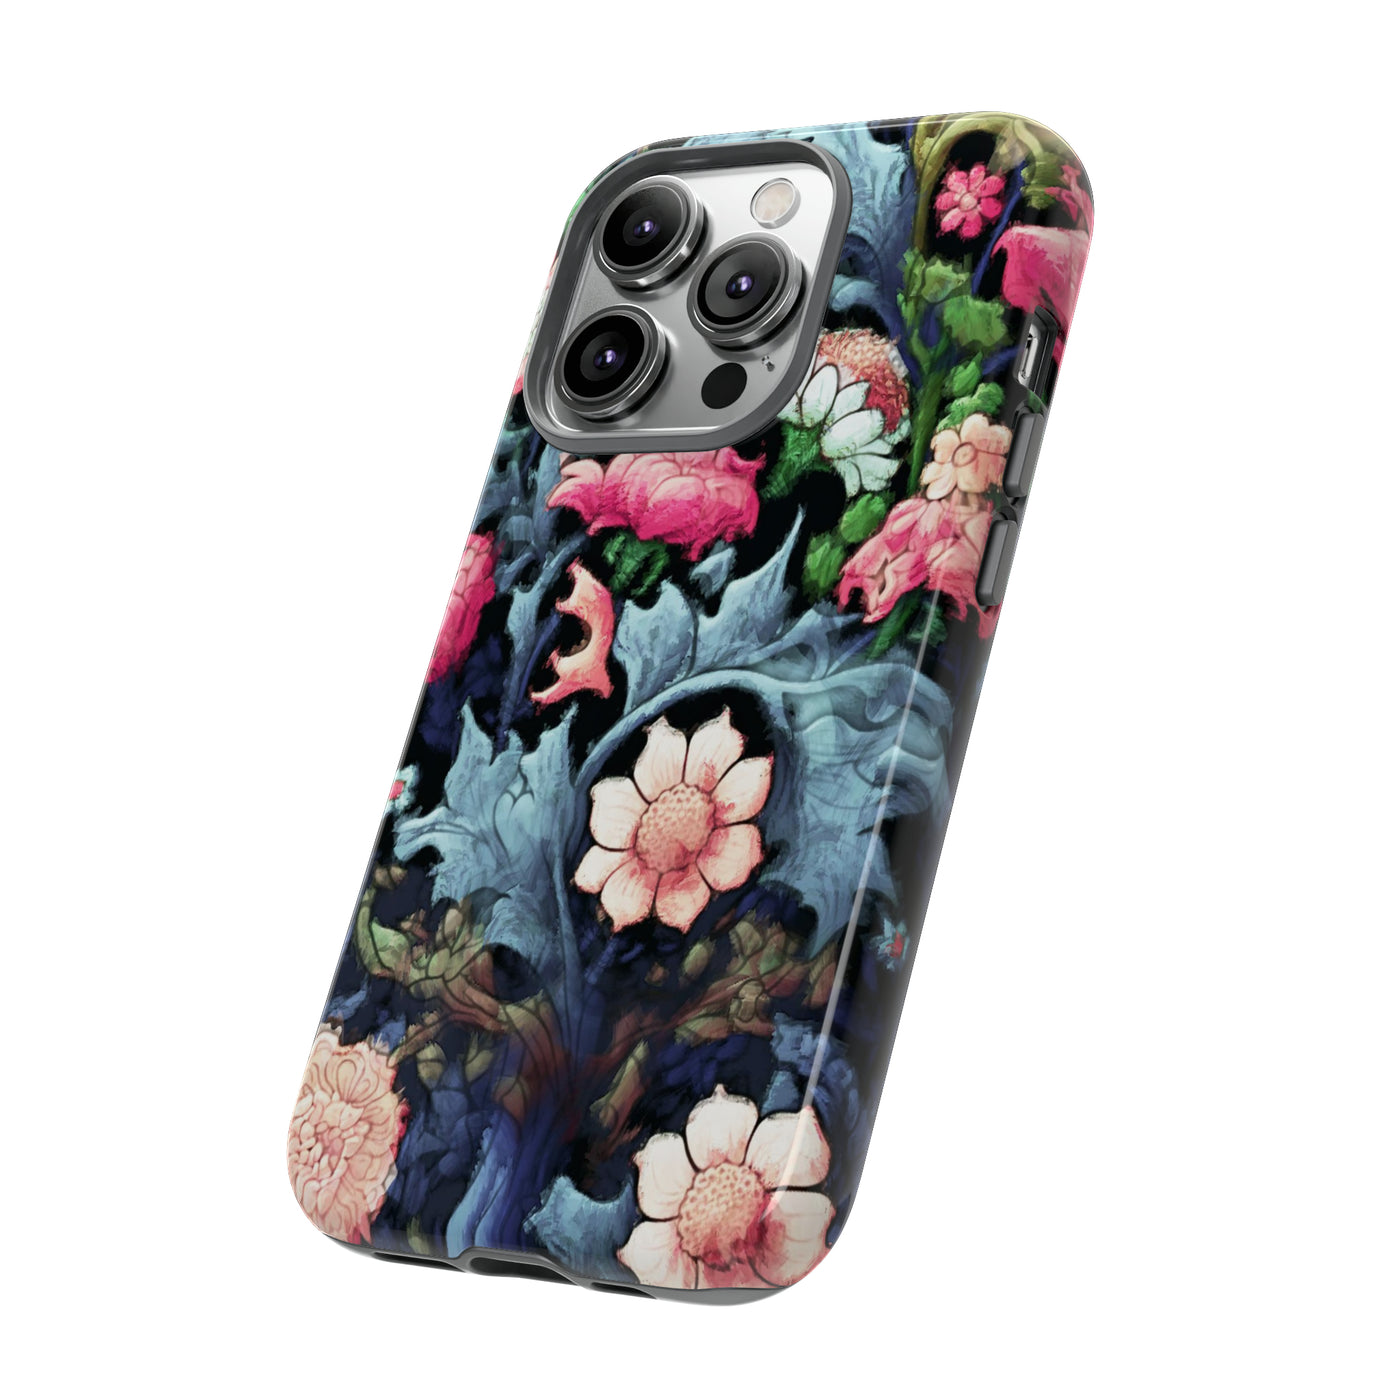 Cute IPhone Case | iPhone 15 Case | iPhone 15 Pro Max Case, Iphone 14 Case, Iphone 14 Pro Max Case IPhone Case for Flowers Lovers, Floral